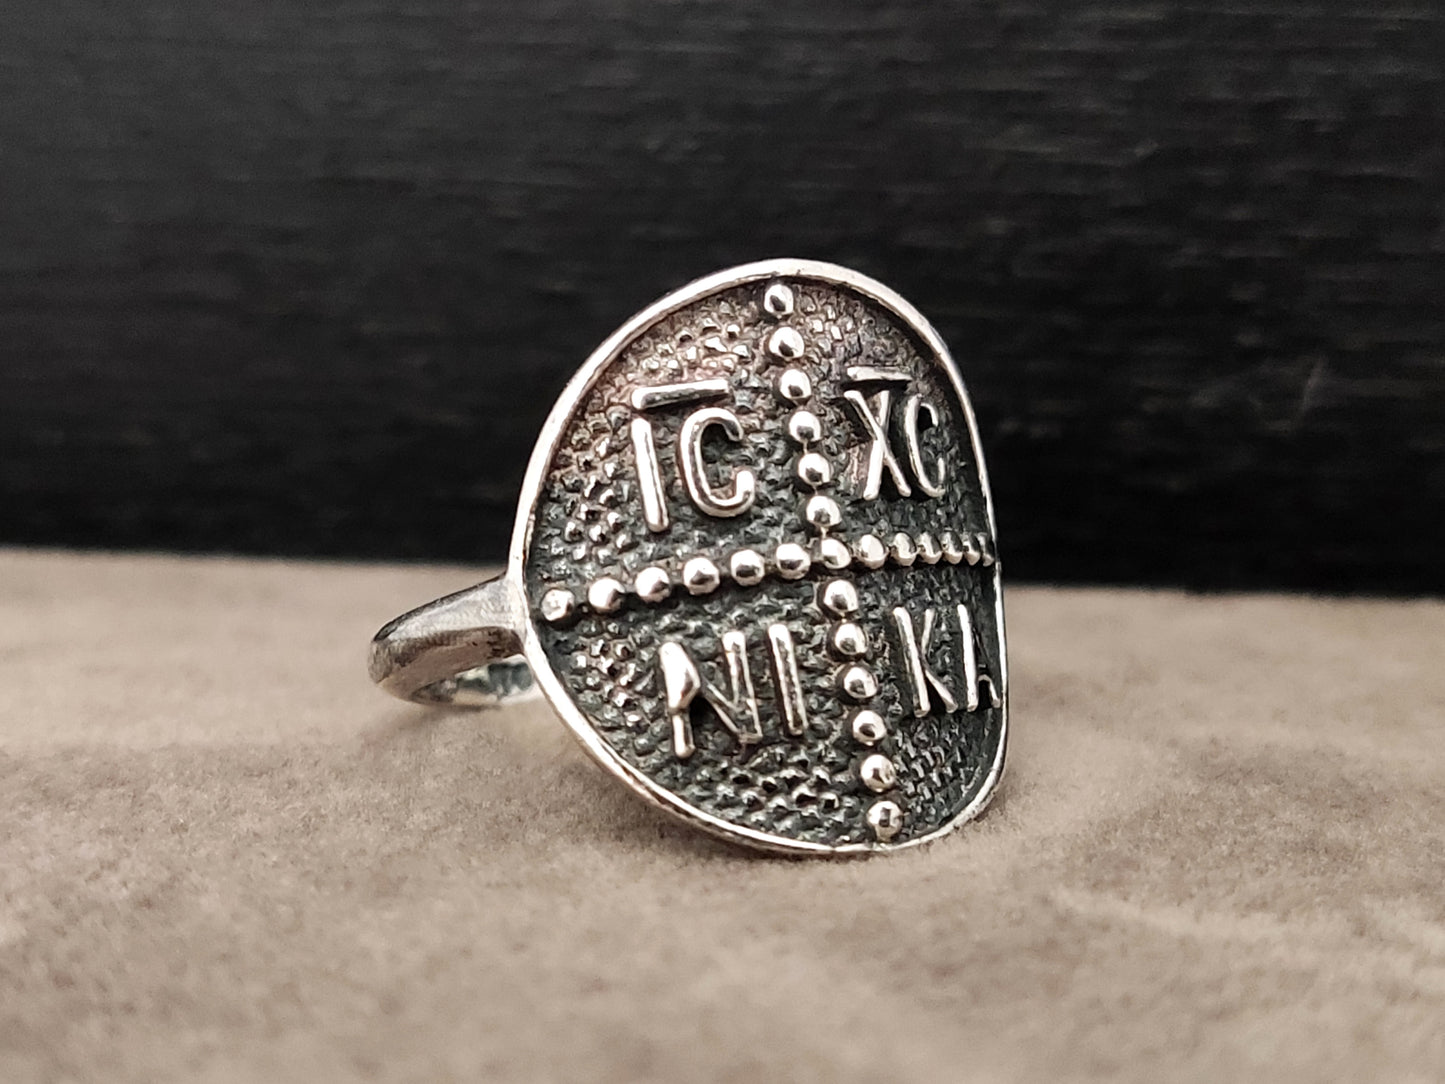 Greek silver ring with the sign of ICXC NIKA cross. It is made of sterling silver 925 in Greece.